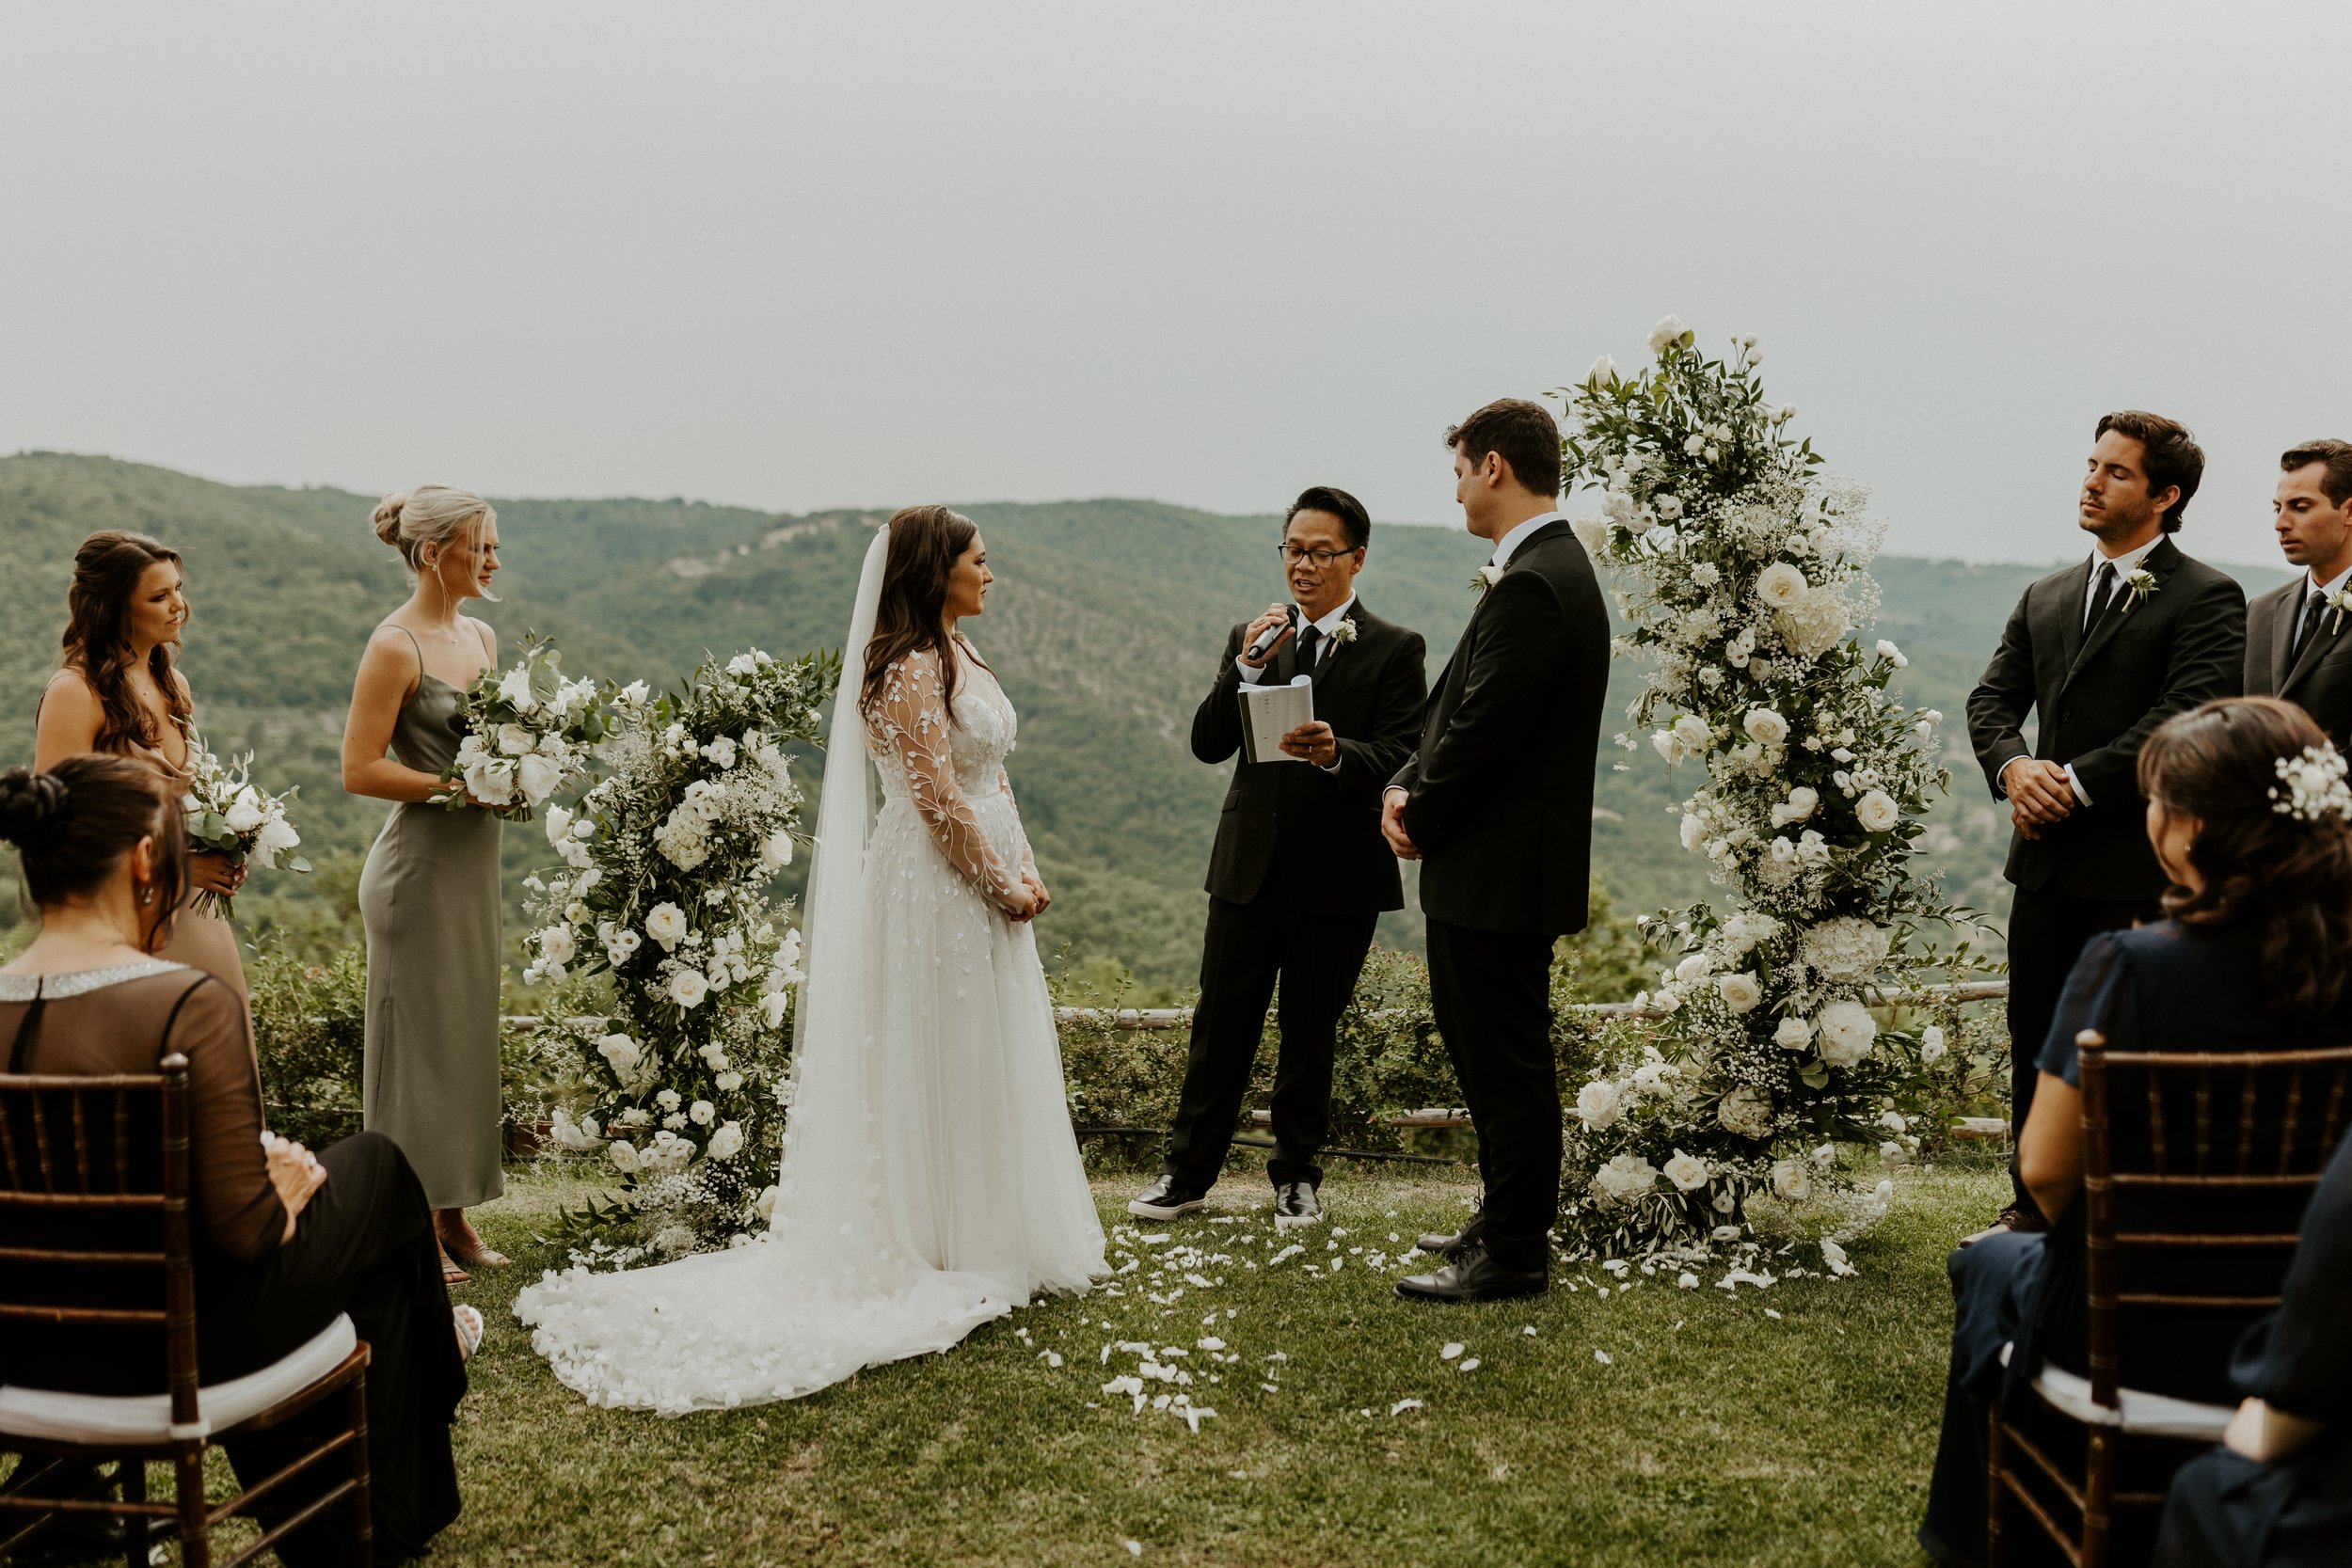 dreamy destination wedding in tuscany featuring a dramatic floral arch and ines di santo wedding dress from anna be